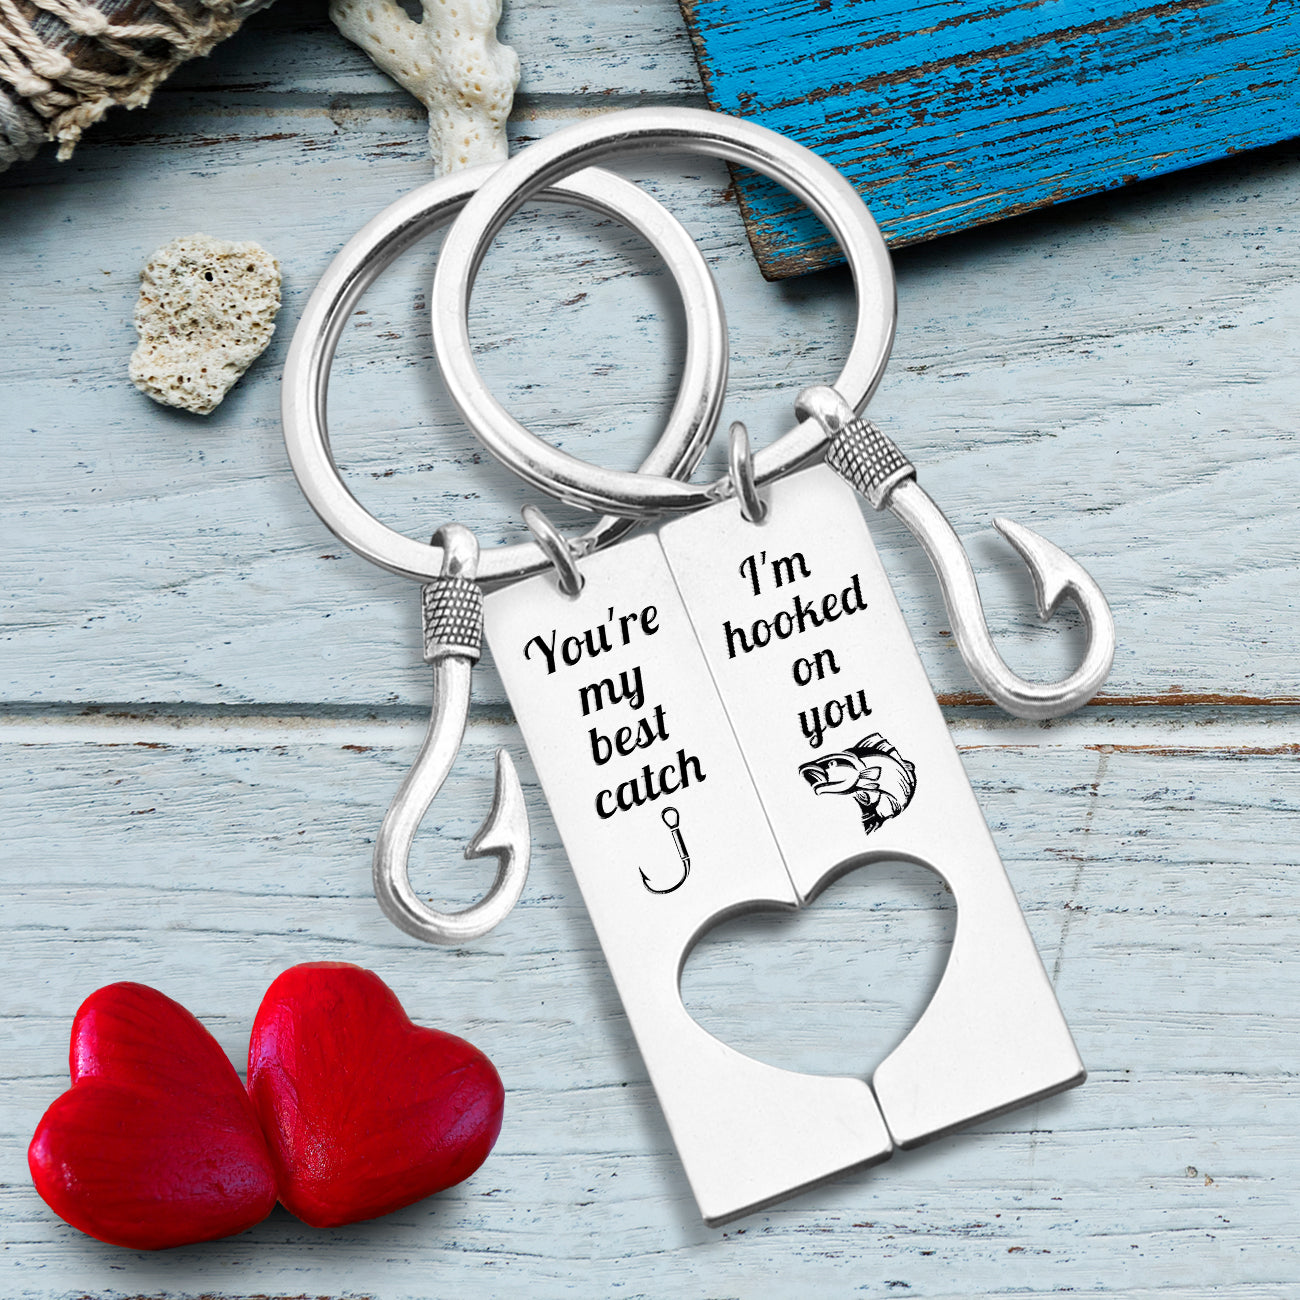 Fishing Heart Couple Keychains - Fishing - To My Man - Together We